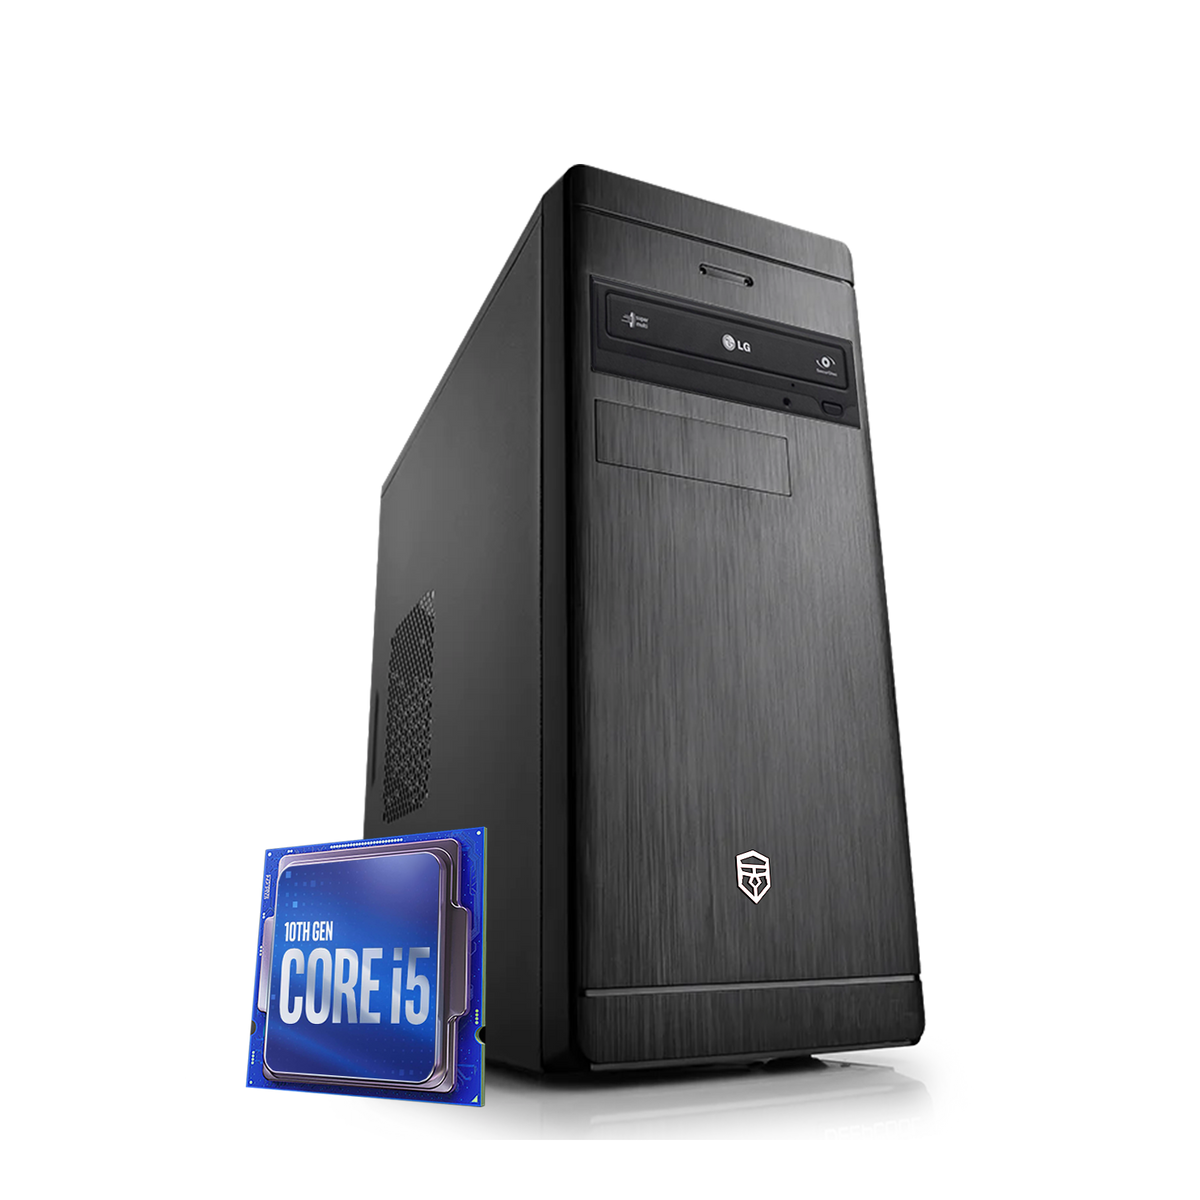 Desktop pc i5 10400, Cpu Core i5 4.30ghz 6 core, Ram 16gb Ddr4, Ssd NVme 500Gb, Writer included, Windows 11 Pro, Pc Office i5, Fixed pc Assembled computer